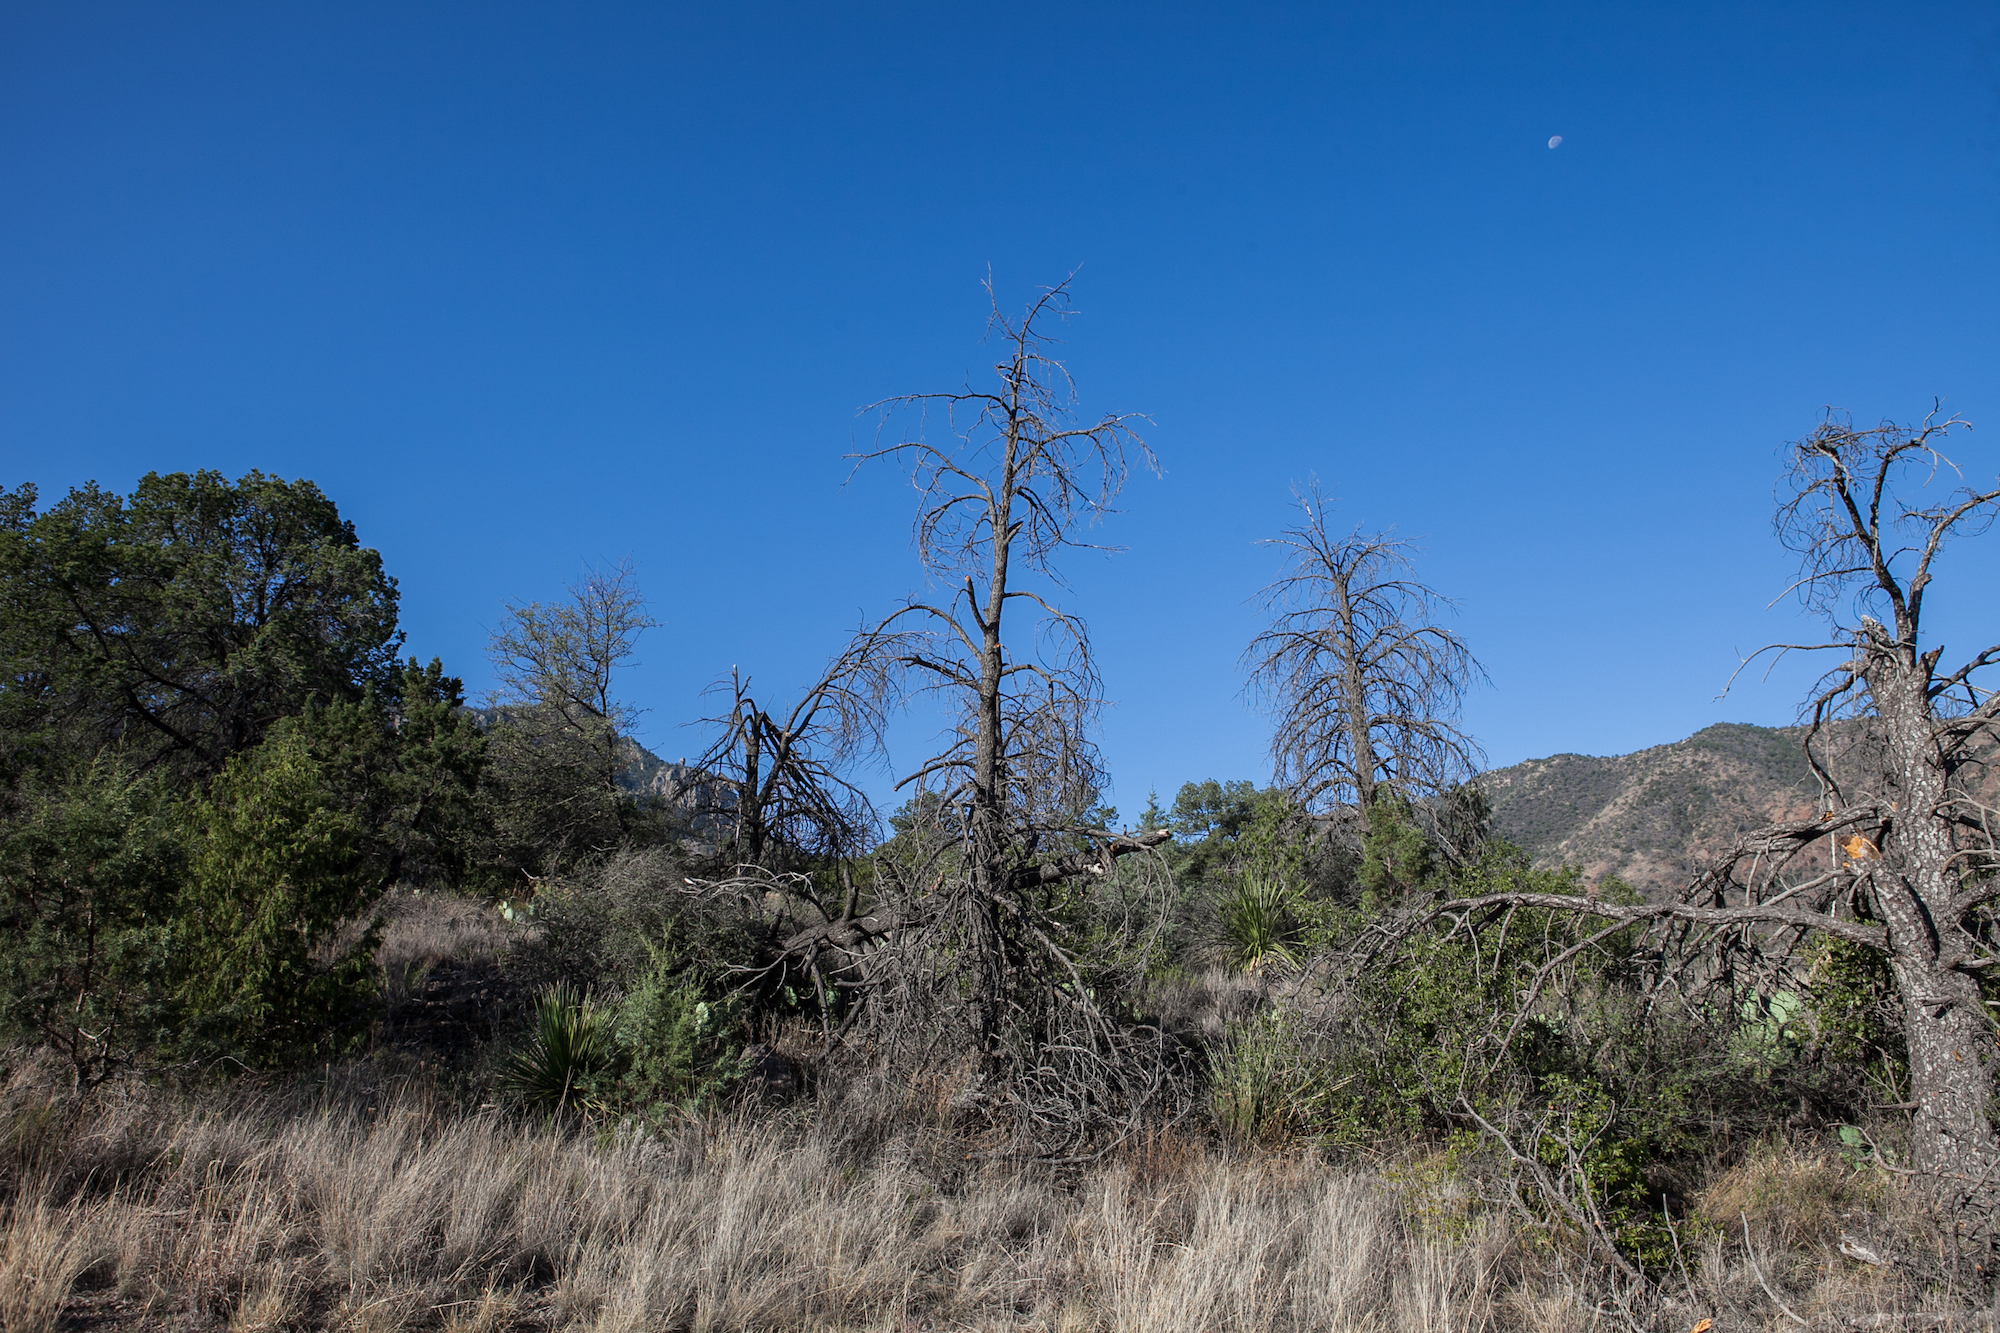 Dead piñon pines near Boot Canyon in Big Bend National Park.